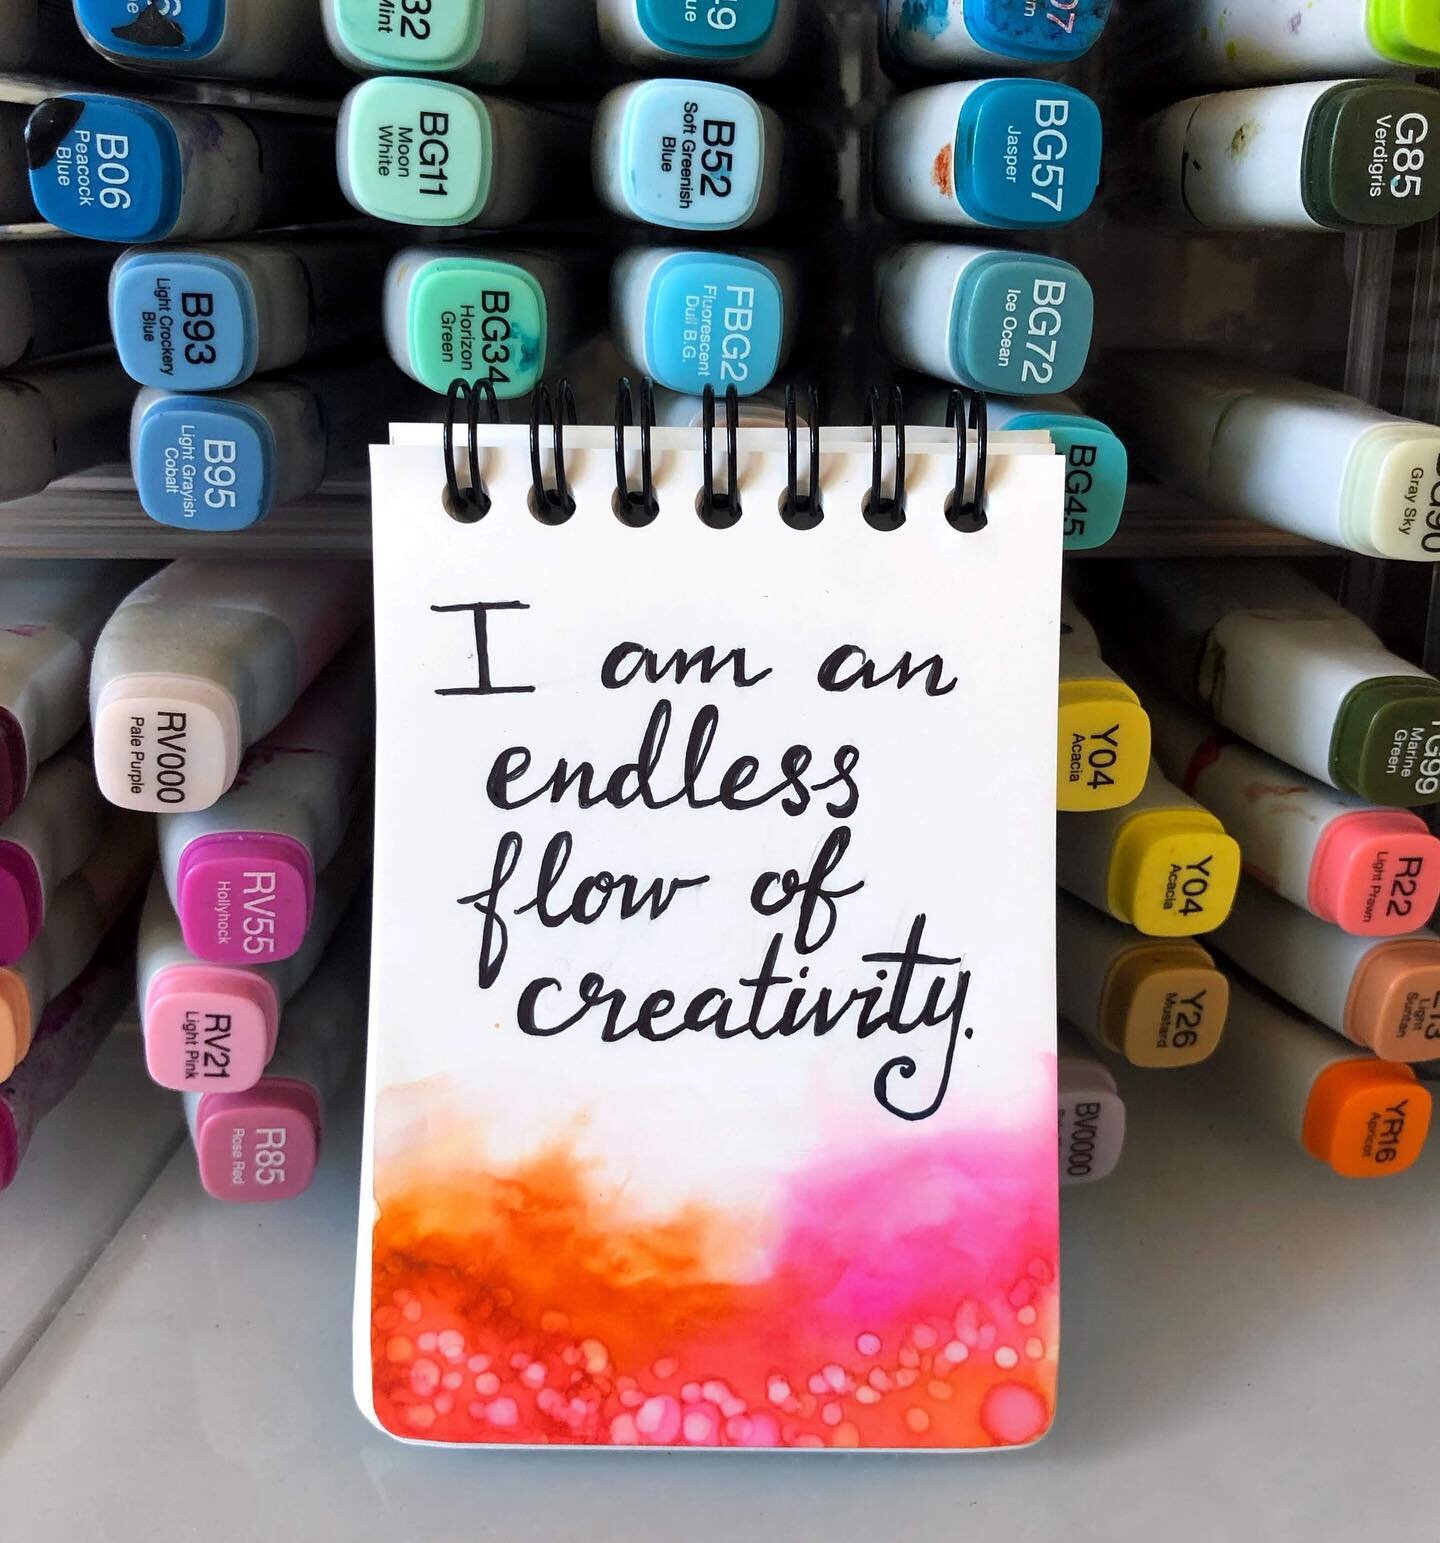 Don&rsquo;t forget, your creativity doesn&rsquo;t disappear or run out. It&rsquo;s always there waiting for you to turn on the valve. There&rsquo;s an abundance of creative energy, literally, it&rsquo;s never ending. Showing up with consistency is mo